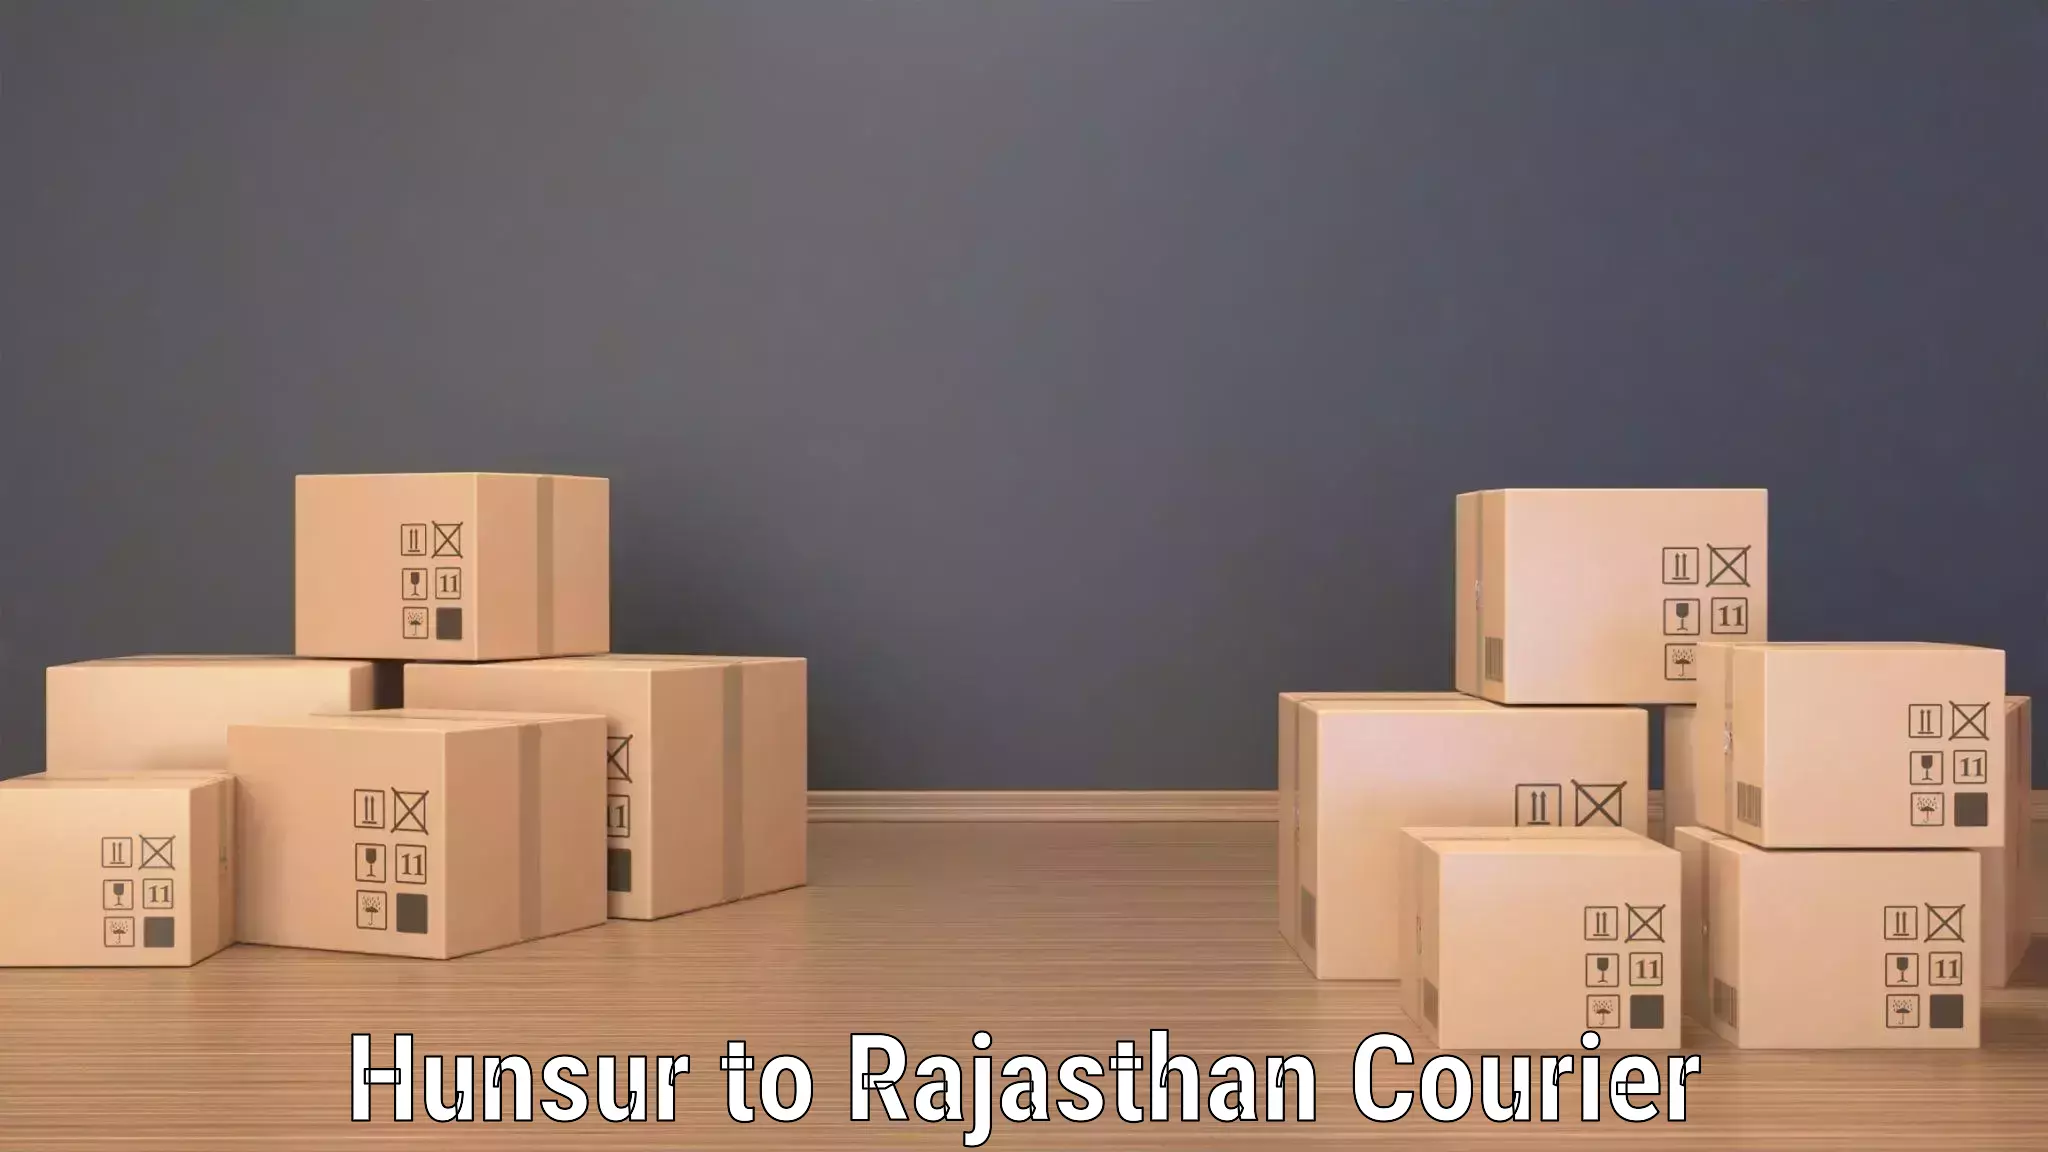 End-to-end delivery Hunsur to Rajgarh Rajasthan